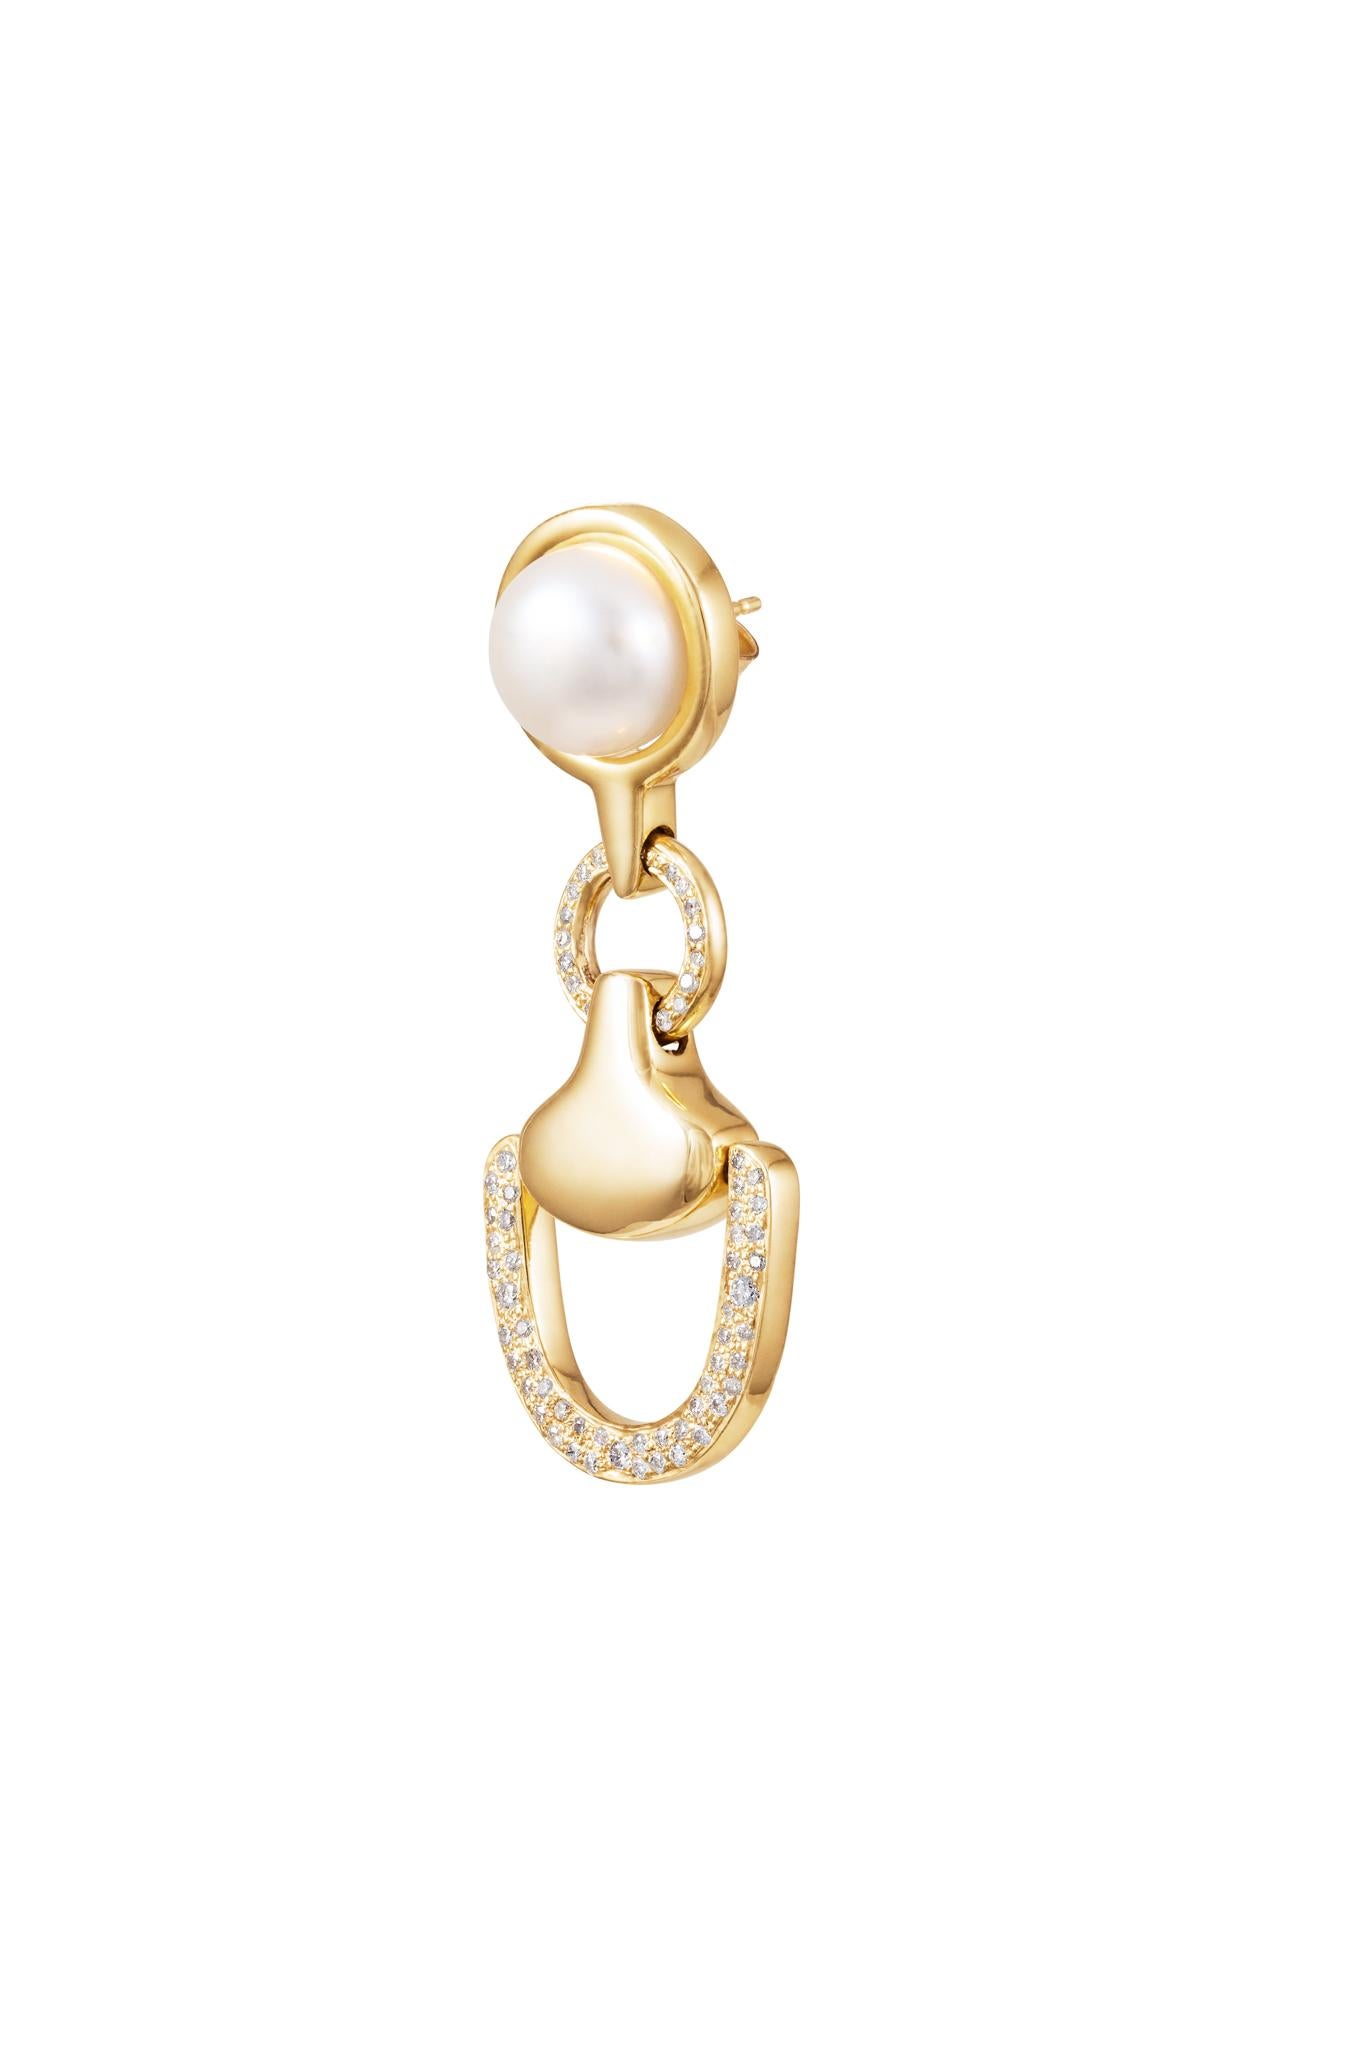 Part of the Vincent Peach Equestrian Collection, the Churchill Downs Earrings have a signature 14kt Yellow Gold Bit Drop design with 1.65ct Diamonds, a Freshwater Pearl, VP design on the back and a Gold Fill Post. These luxurious and chic earrings